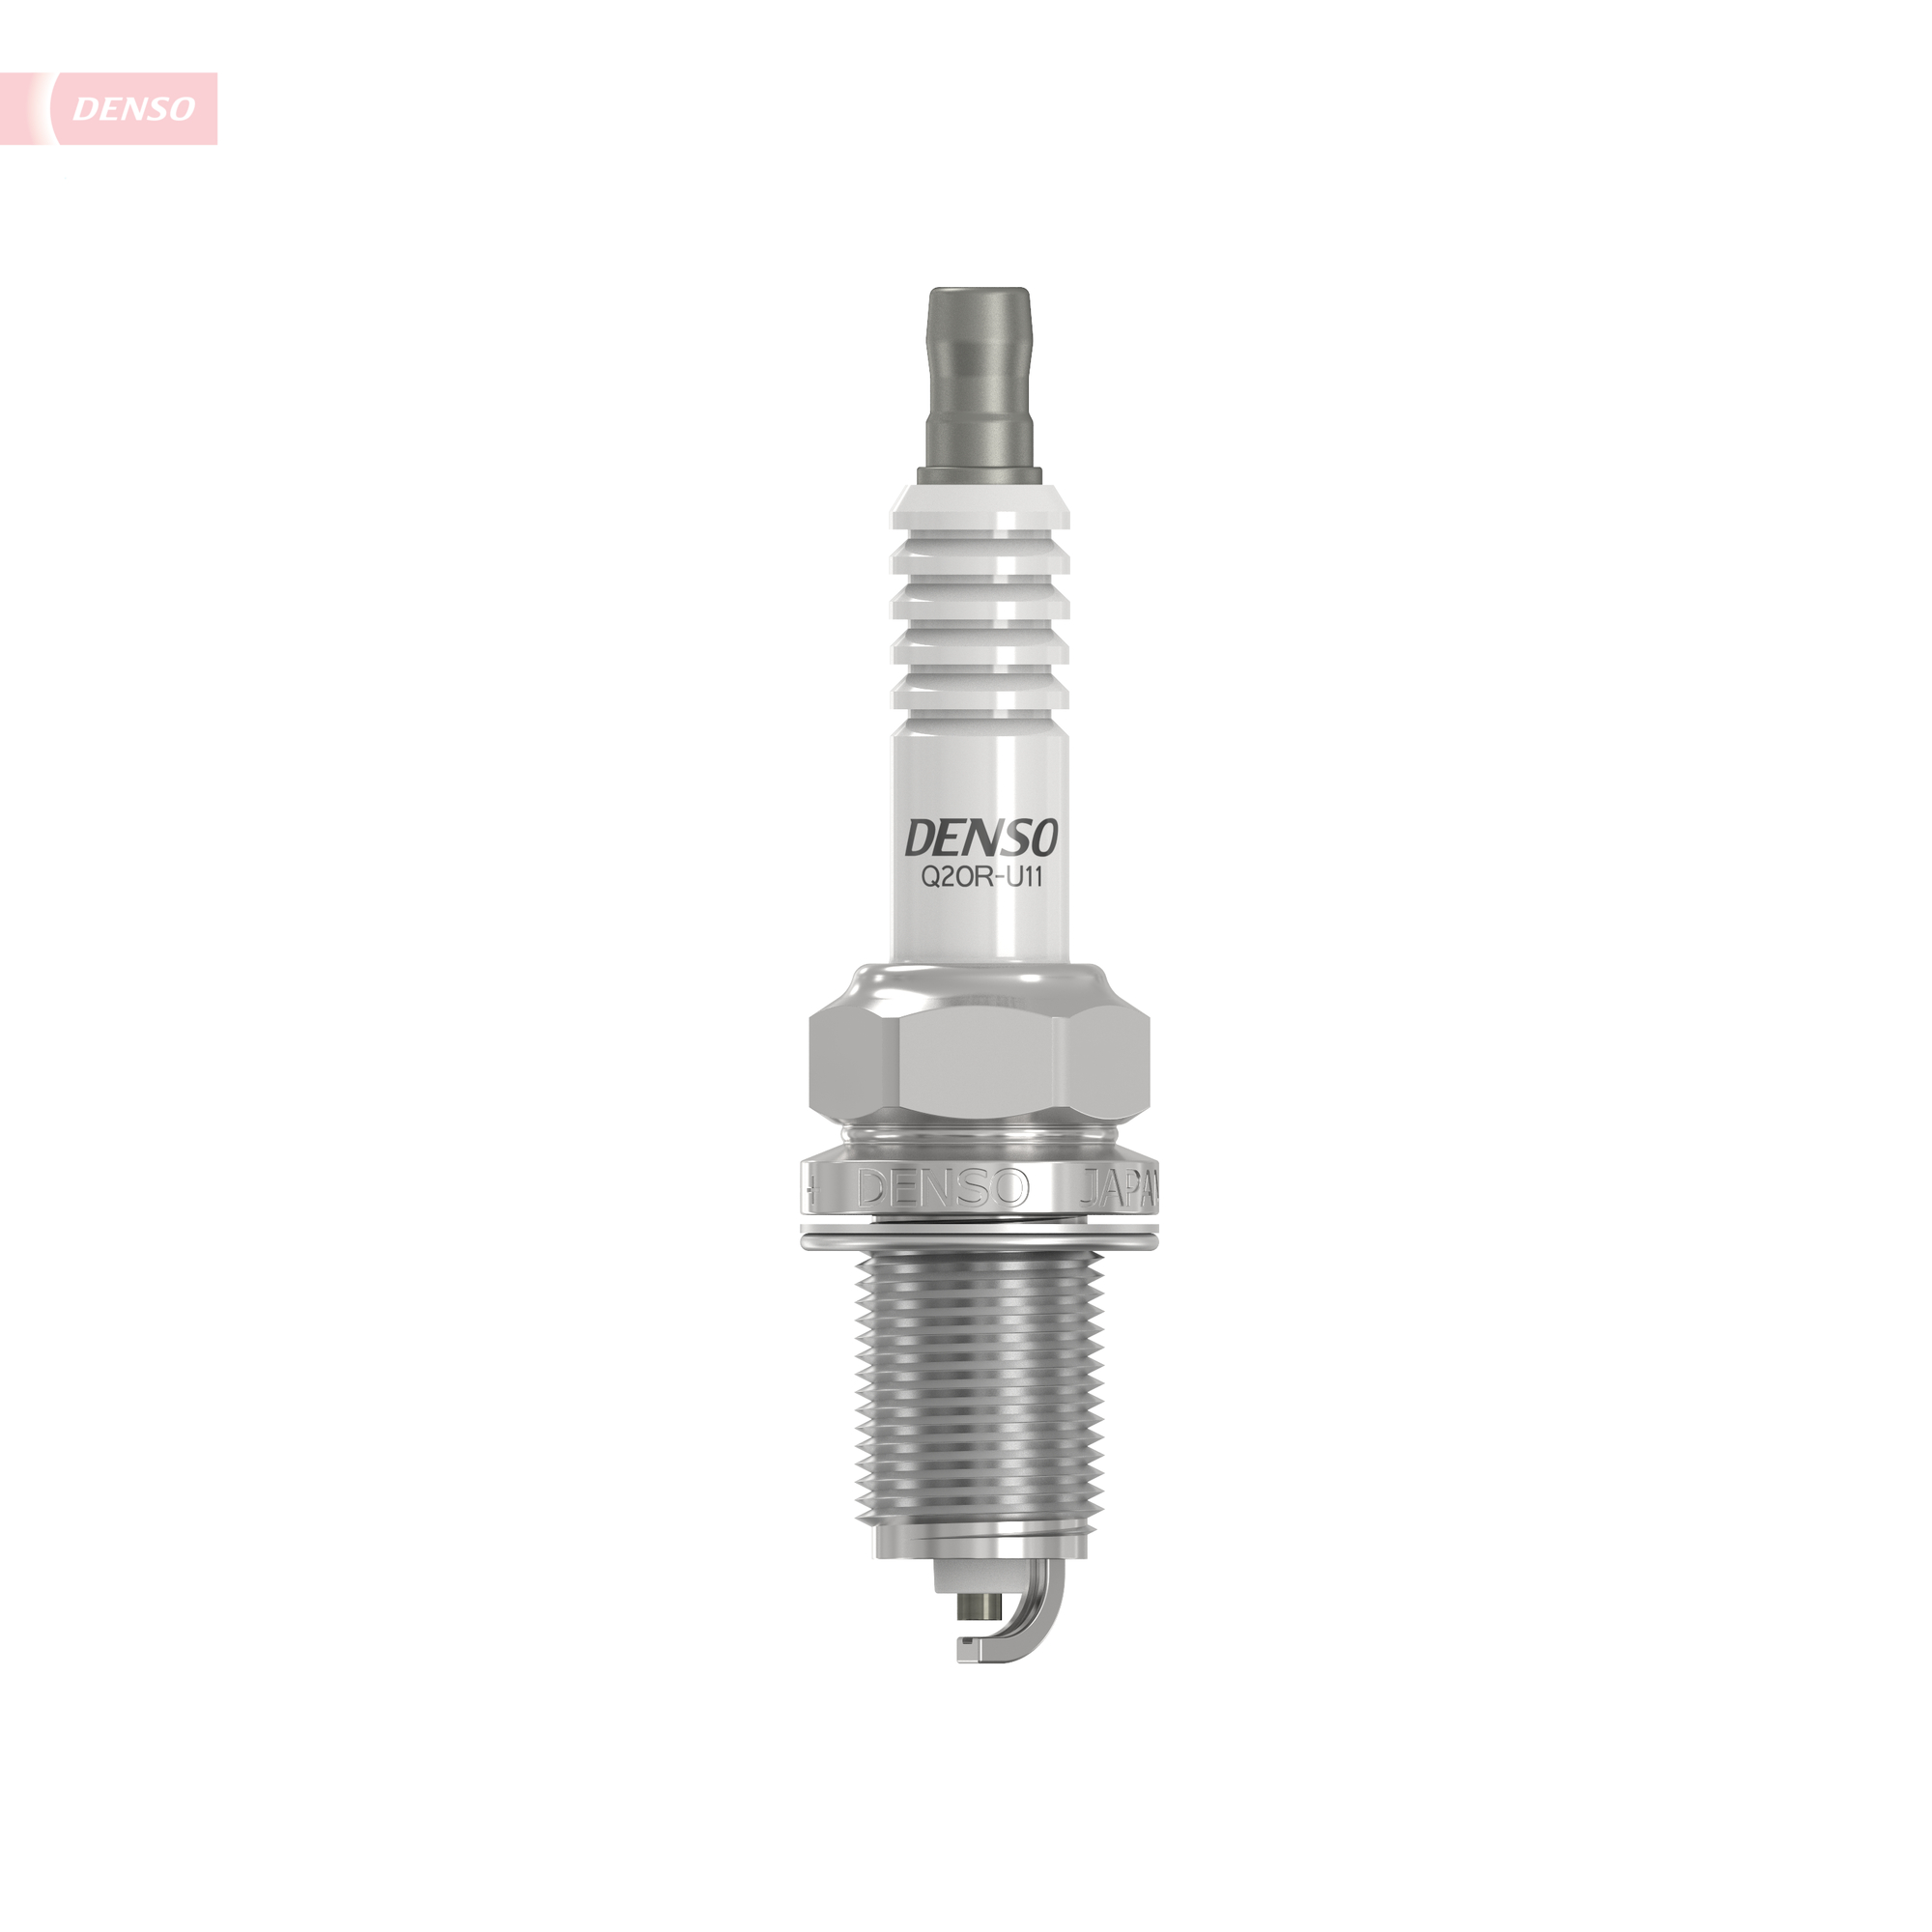 Picture of DENSO - Q20R-U11 - Spark Plug (Ignition System)